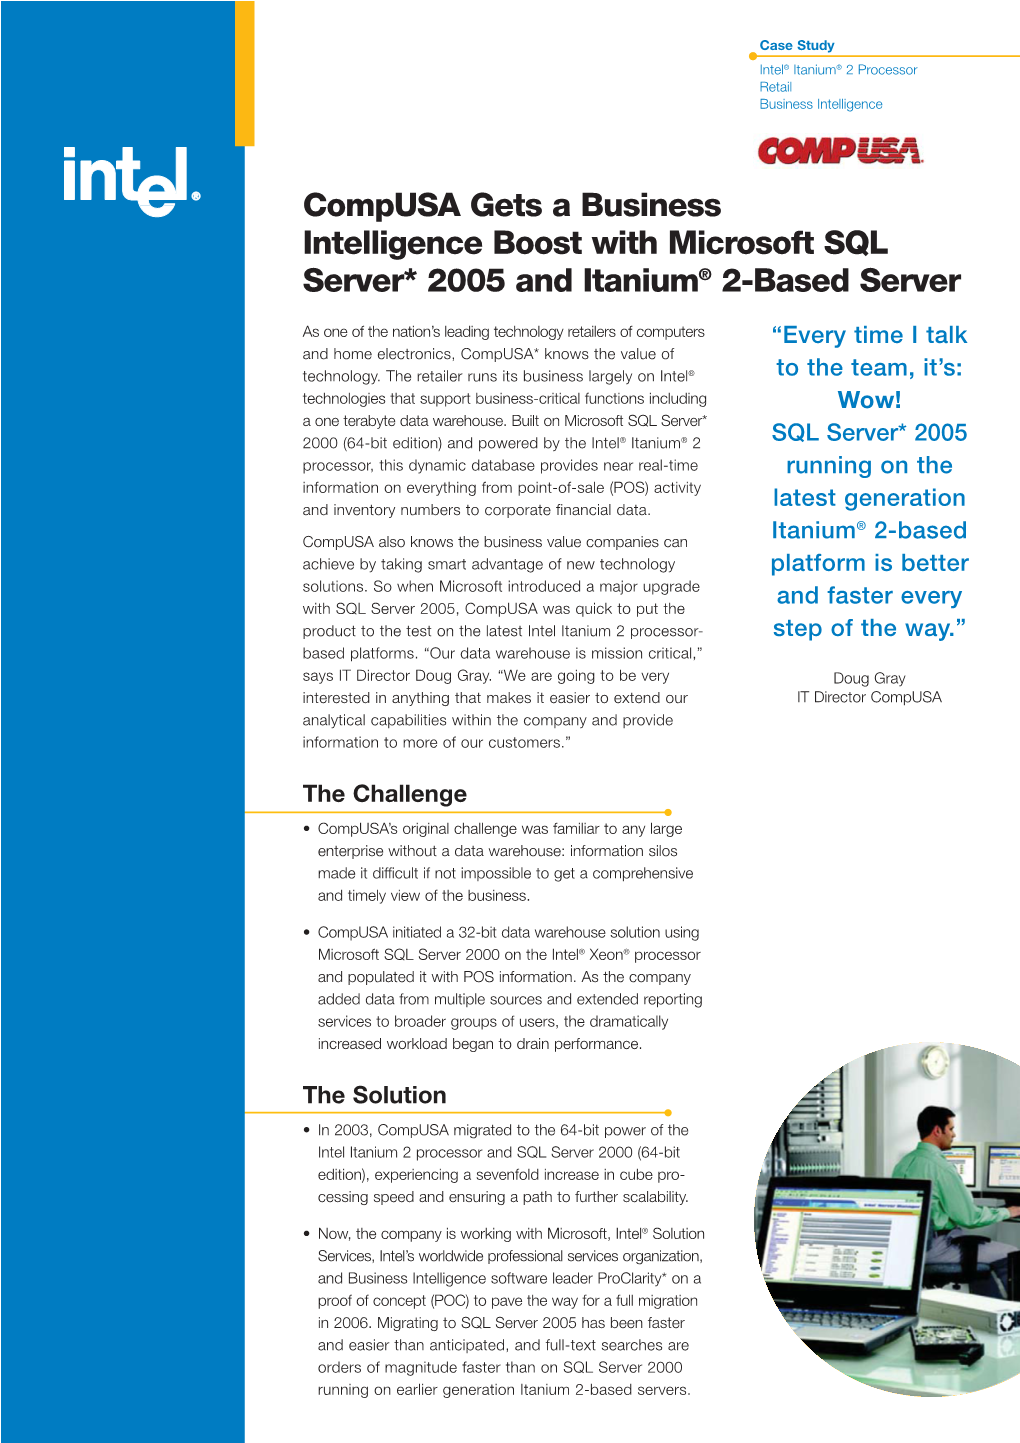 Compusa Gets a Business Intelligence Boost with Microsoft SQL Server* 2005 and Itanium® 2-Based Server